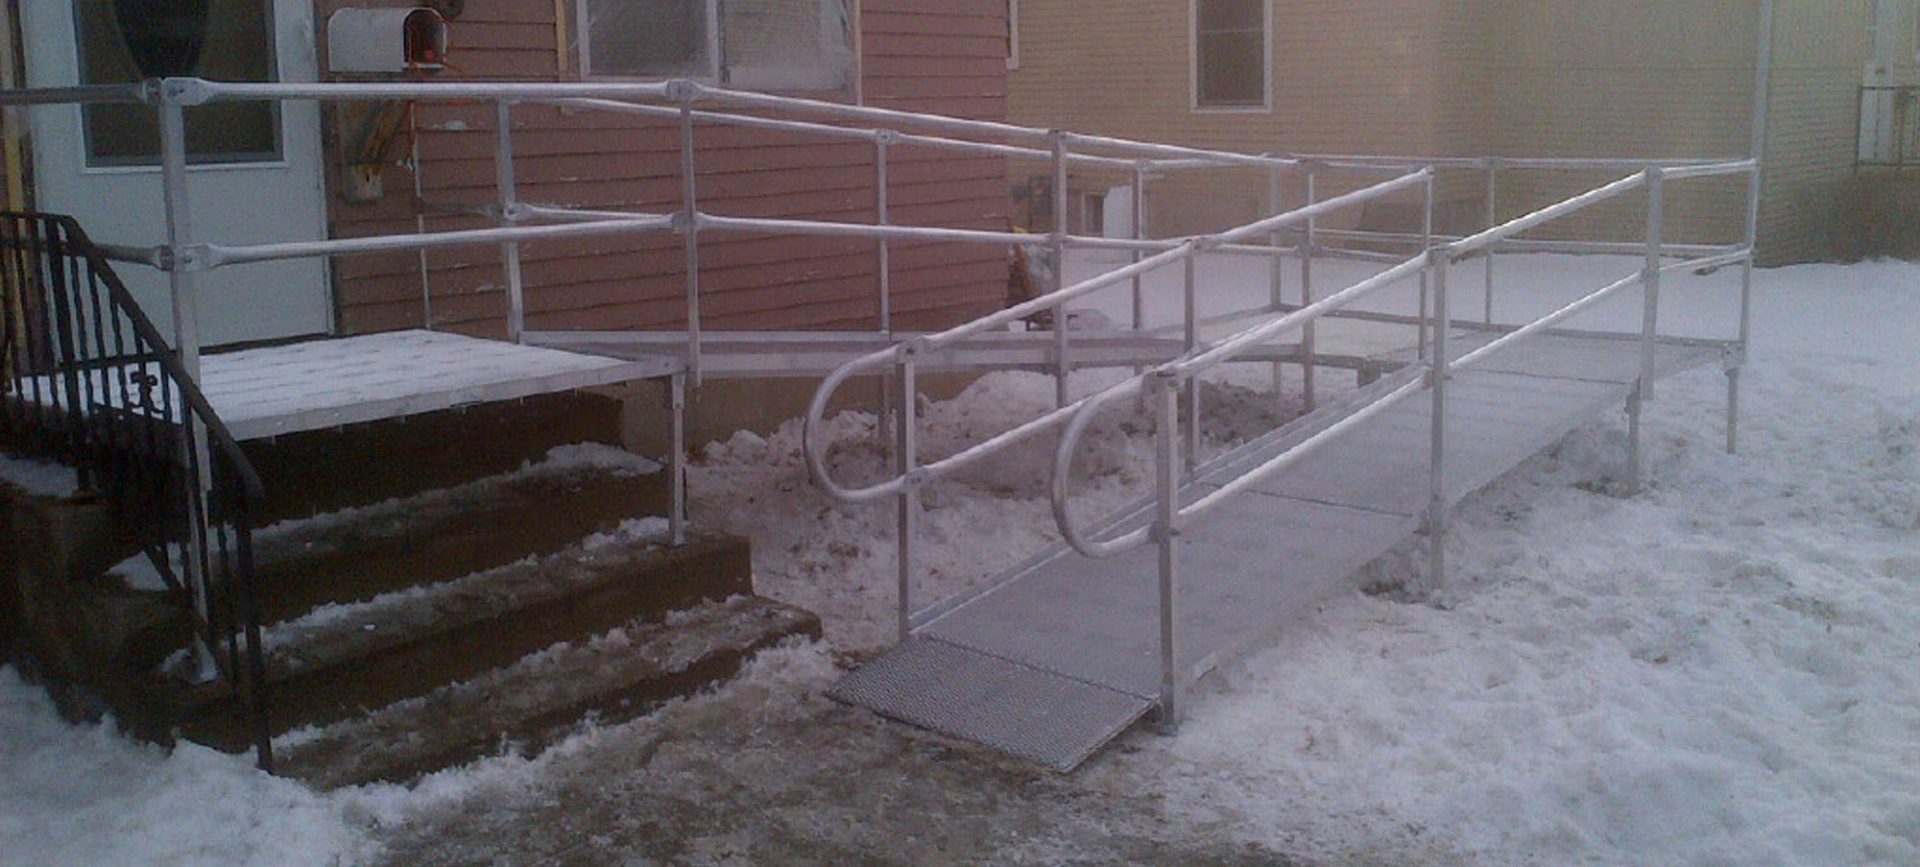 Maintain Your Wheelchair Ramp in the Snow - Snow on a Breeze Ramp